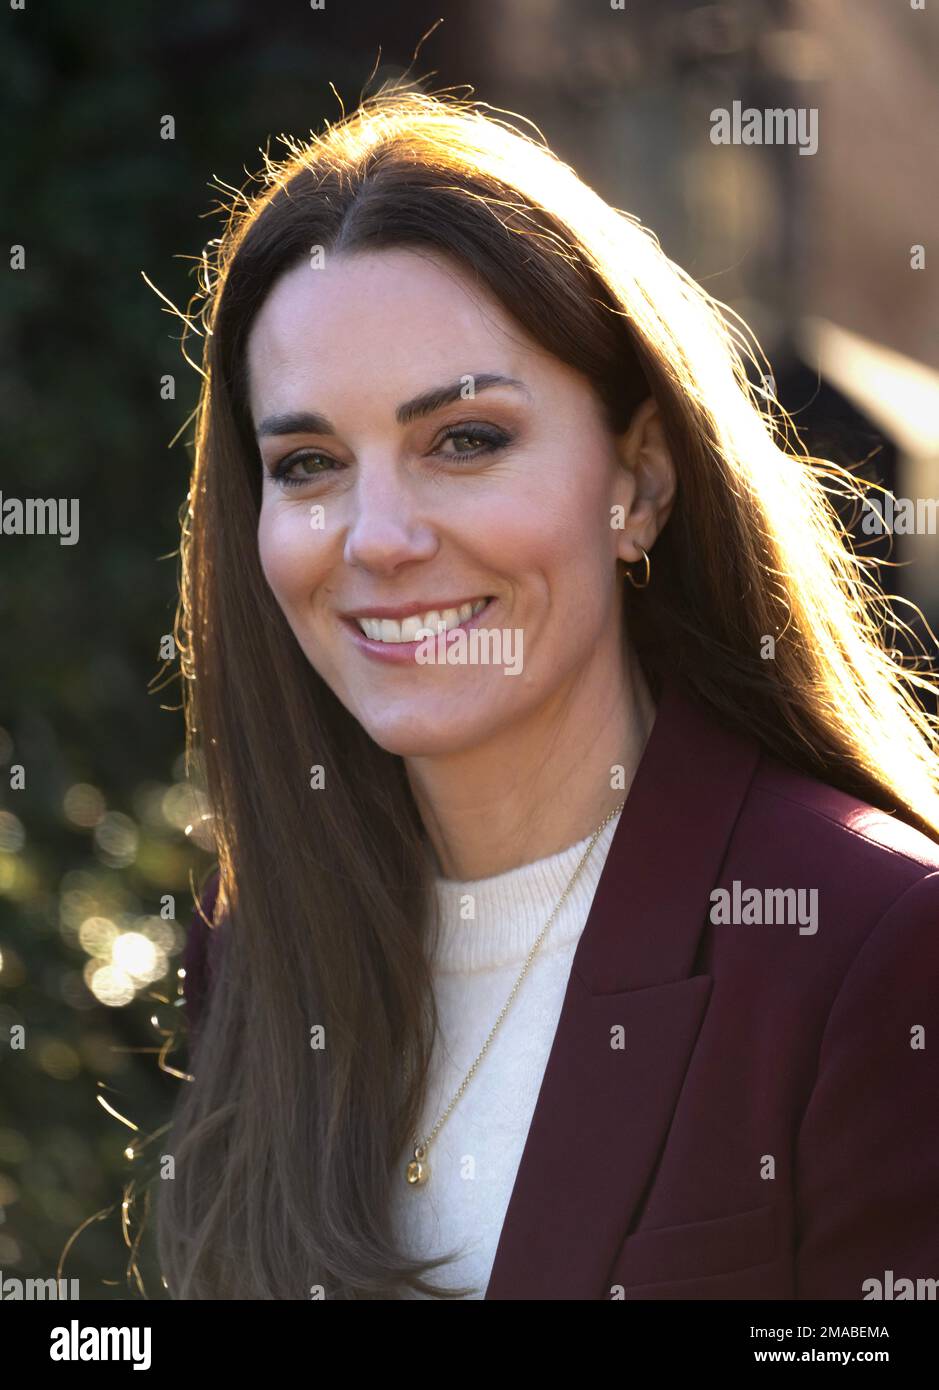 London, UK. 19th Nov, 2023. January 9th, 2023. London, UK. The Princess of Wales, Patron of the Rugby Football League, hosts a reception for the England Wheelchair Rugby League team in recognition of their success at the recent Rugby League World Cup, at Hampton Court Palace. Credit: Doug Peters/Alamy Live News Stock Photo